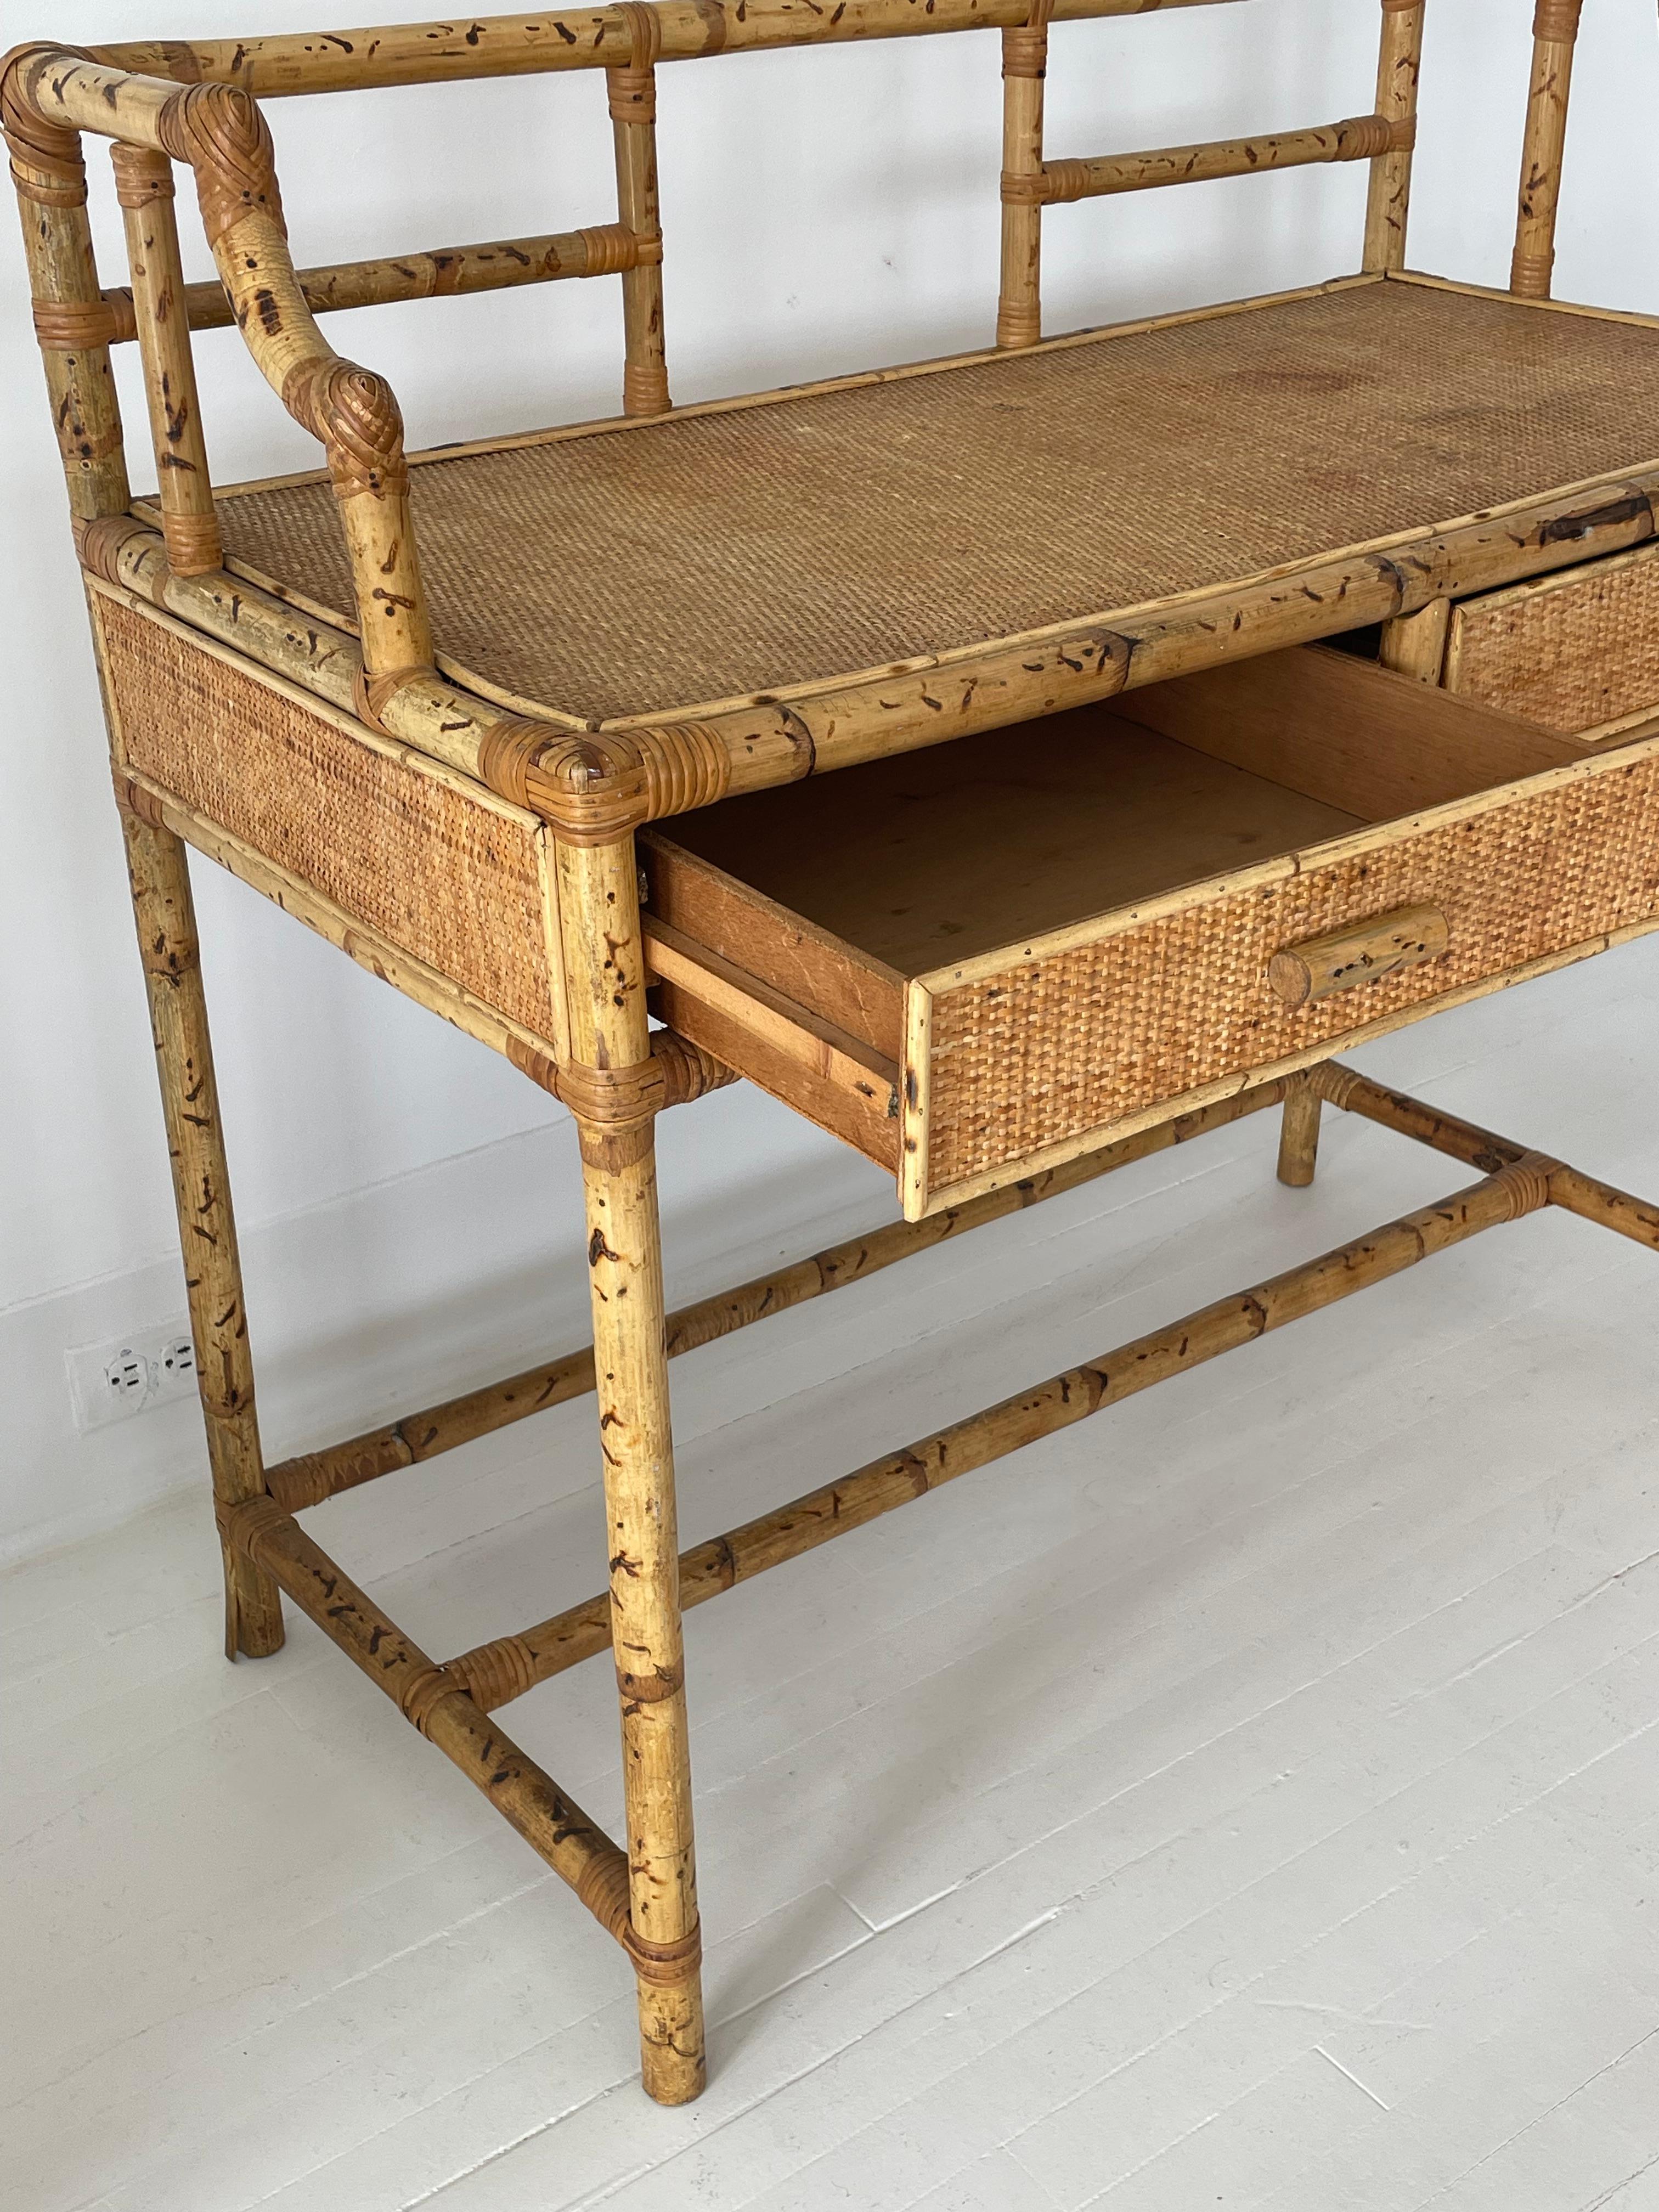 British Colonial Vintage Bamboo and Grass Cloth Desk